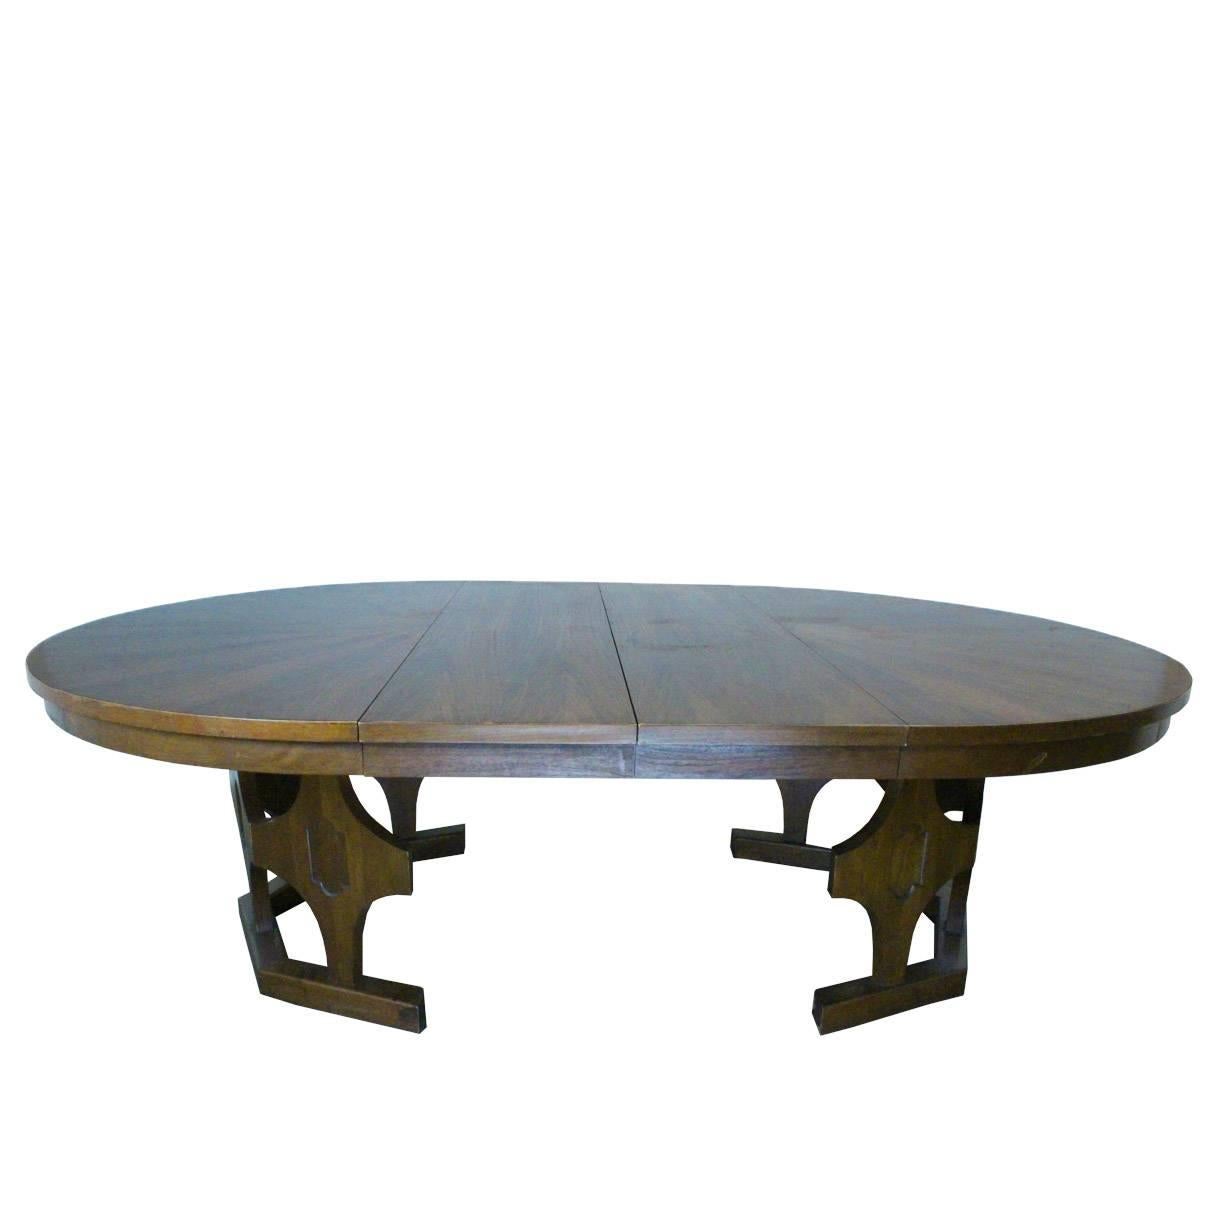 1960s Mid-Century Expandable Round Walnut Dining Table. 

dimensions: 60